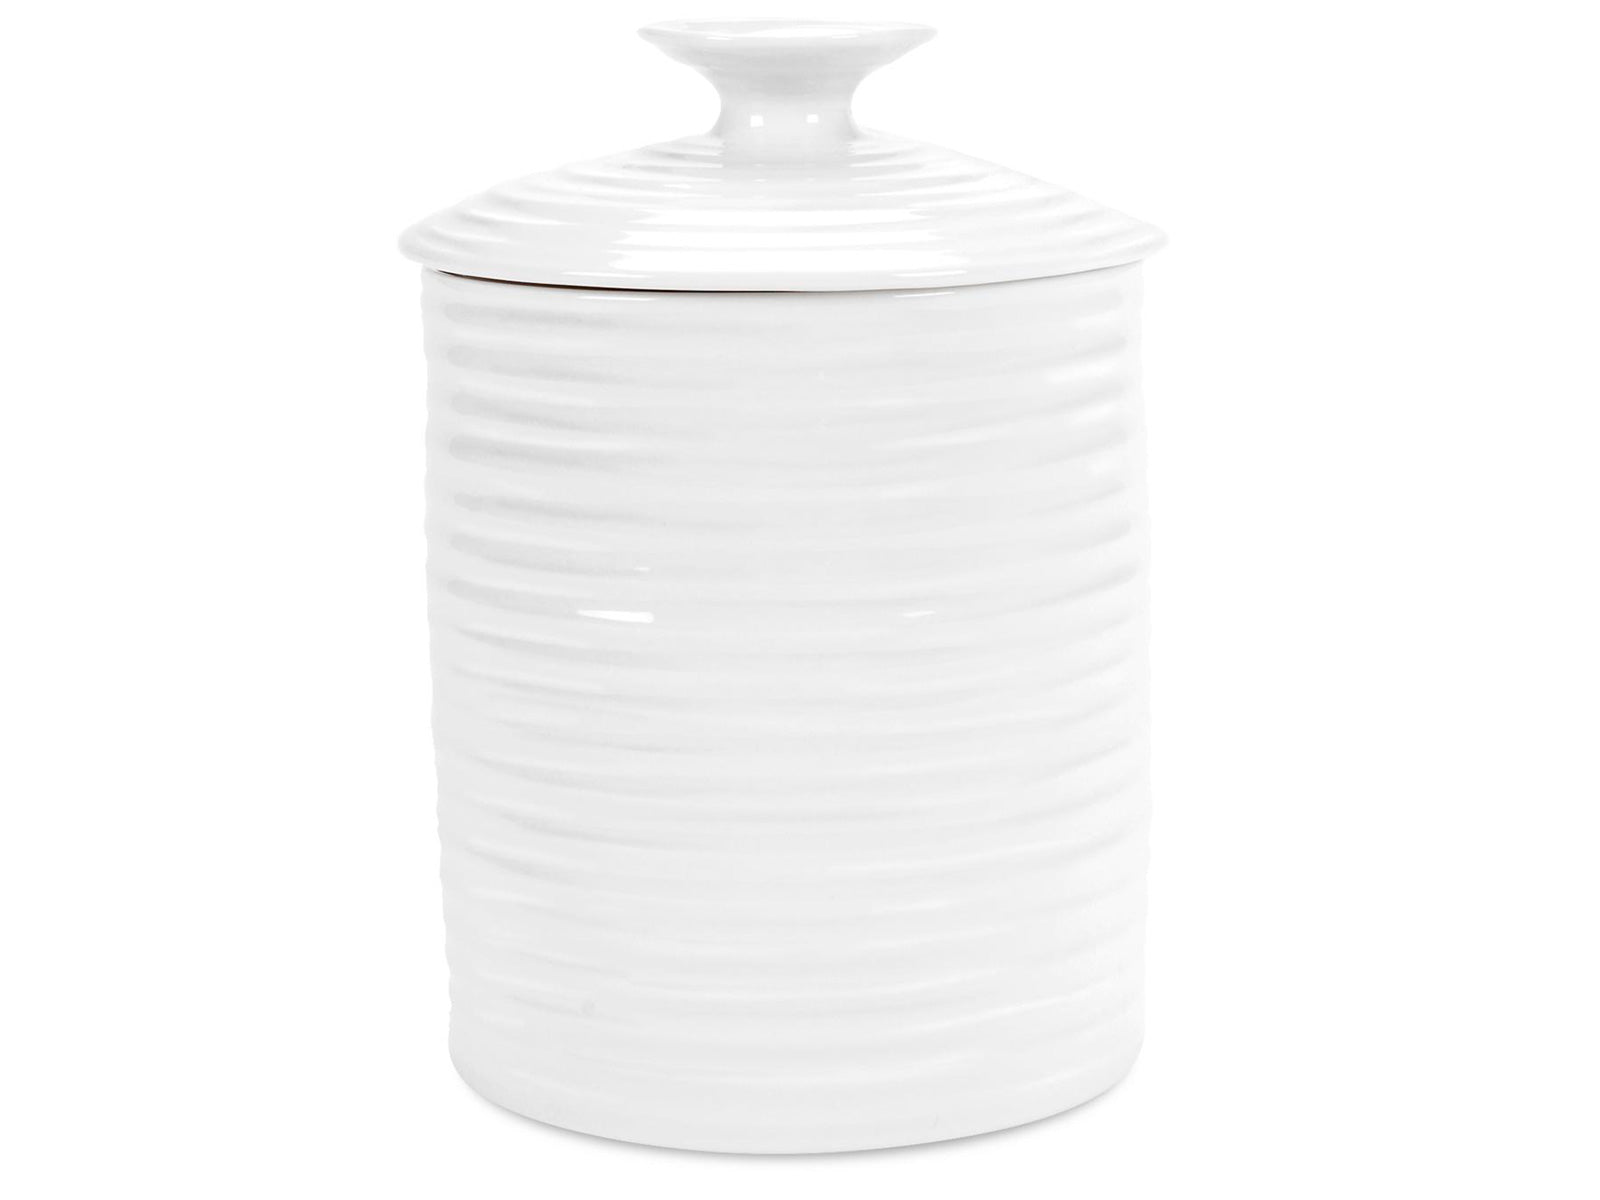 A porcelain storage container with a handled lid with a rippled texture